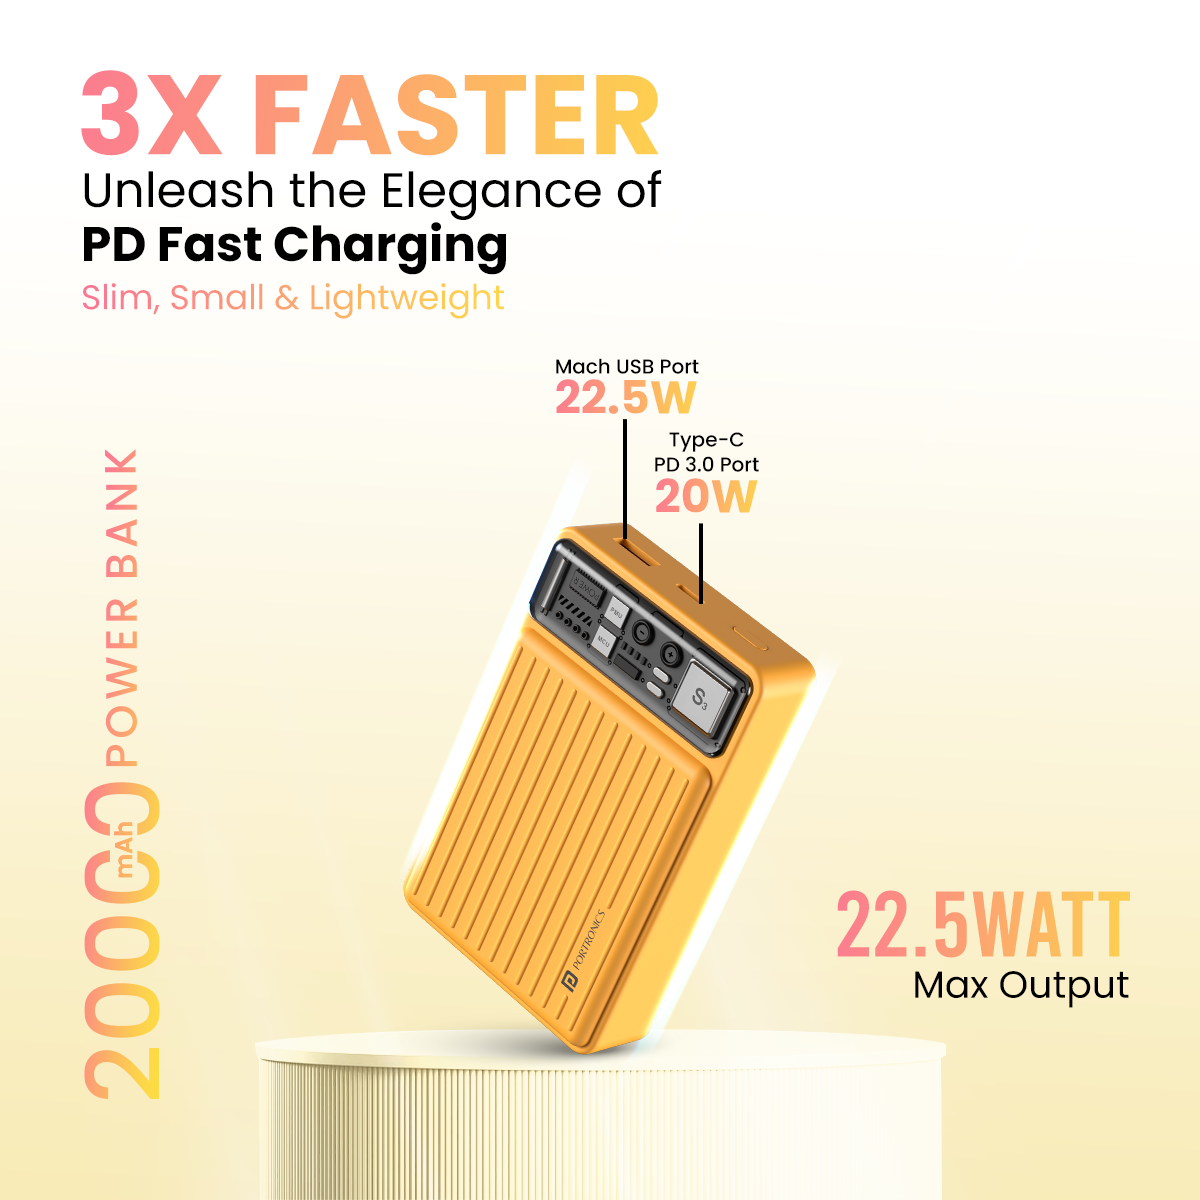 Luxcell mini 20k 20000mah powerbank charge device 3x faster| fast charging powerbank. Yellow